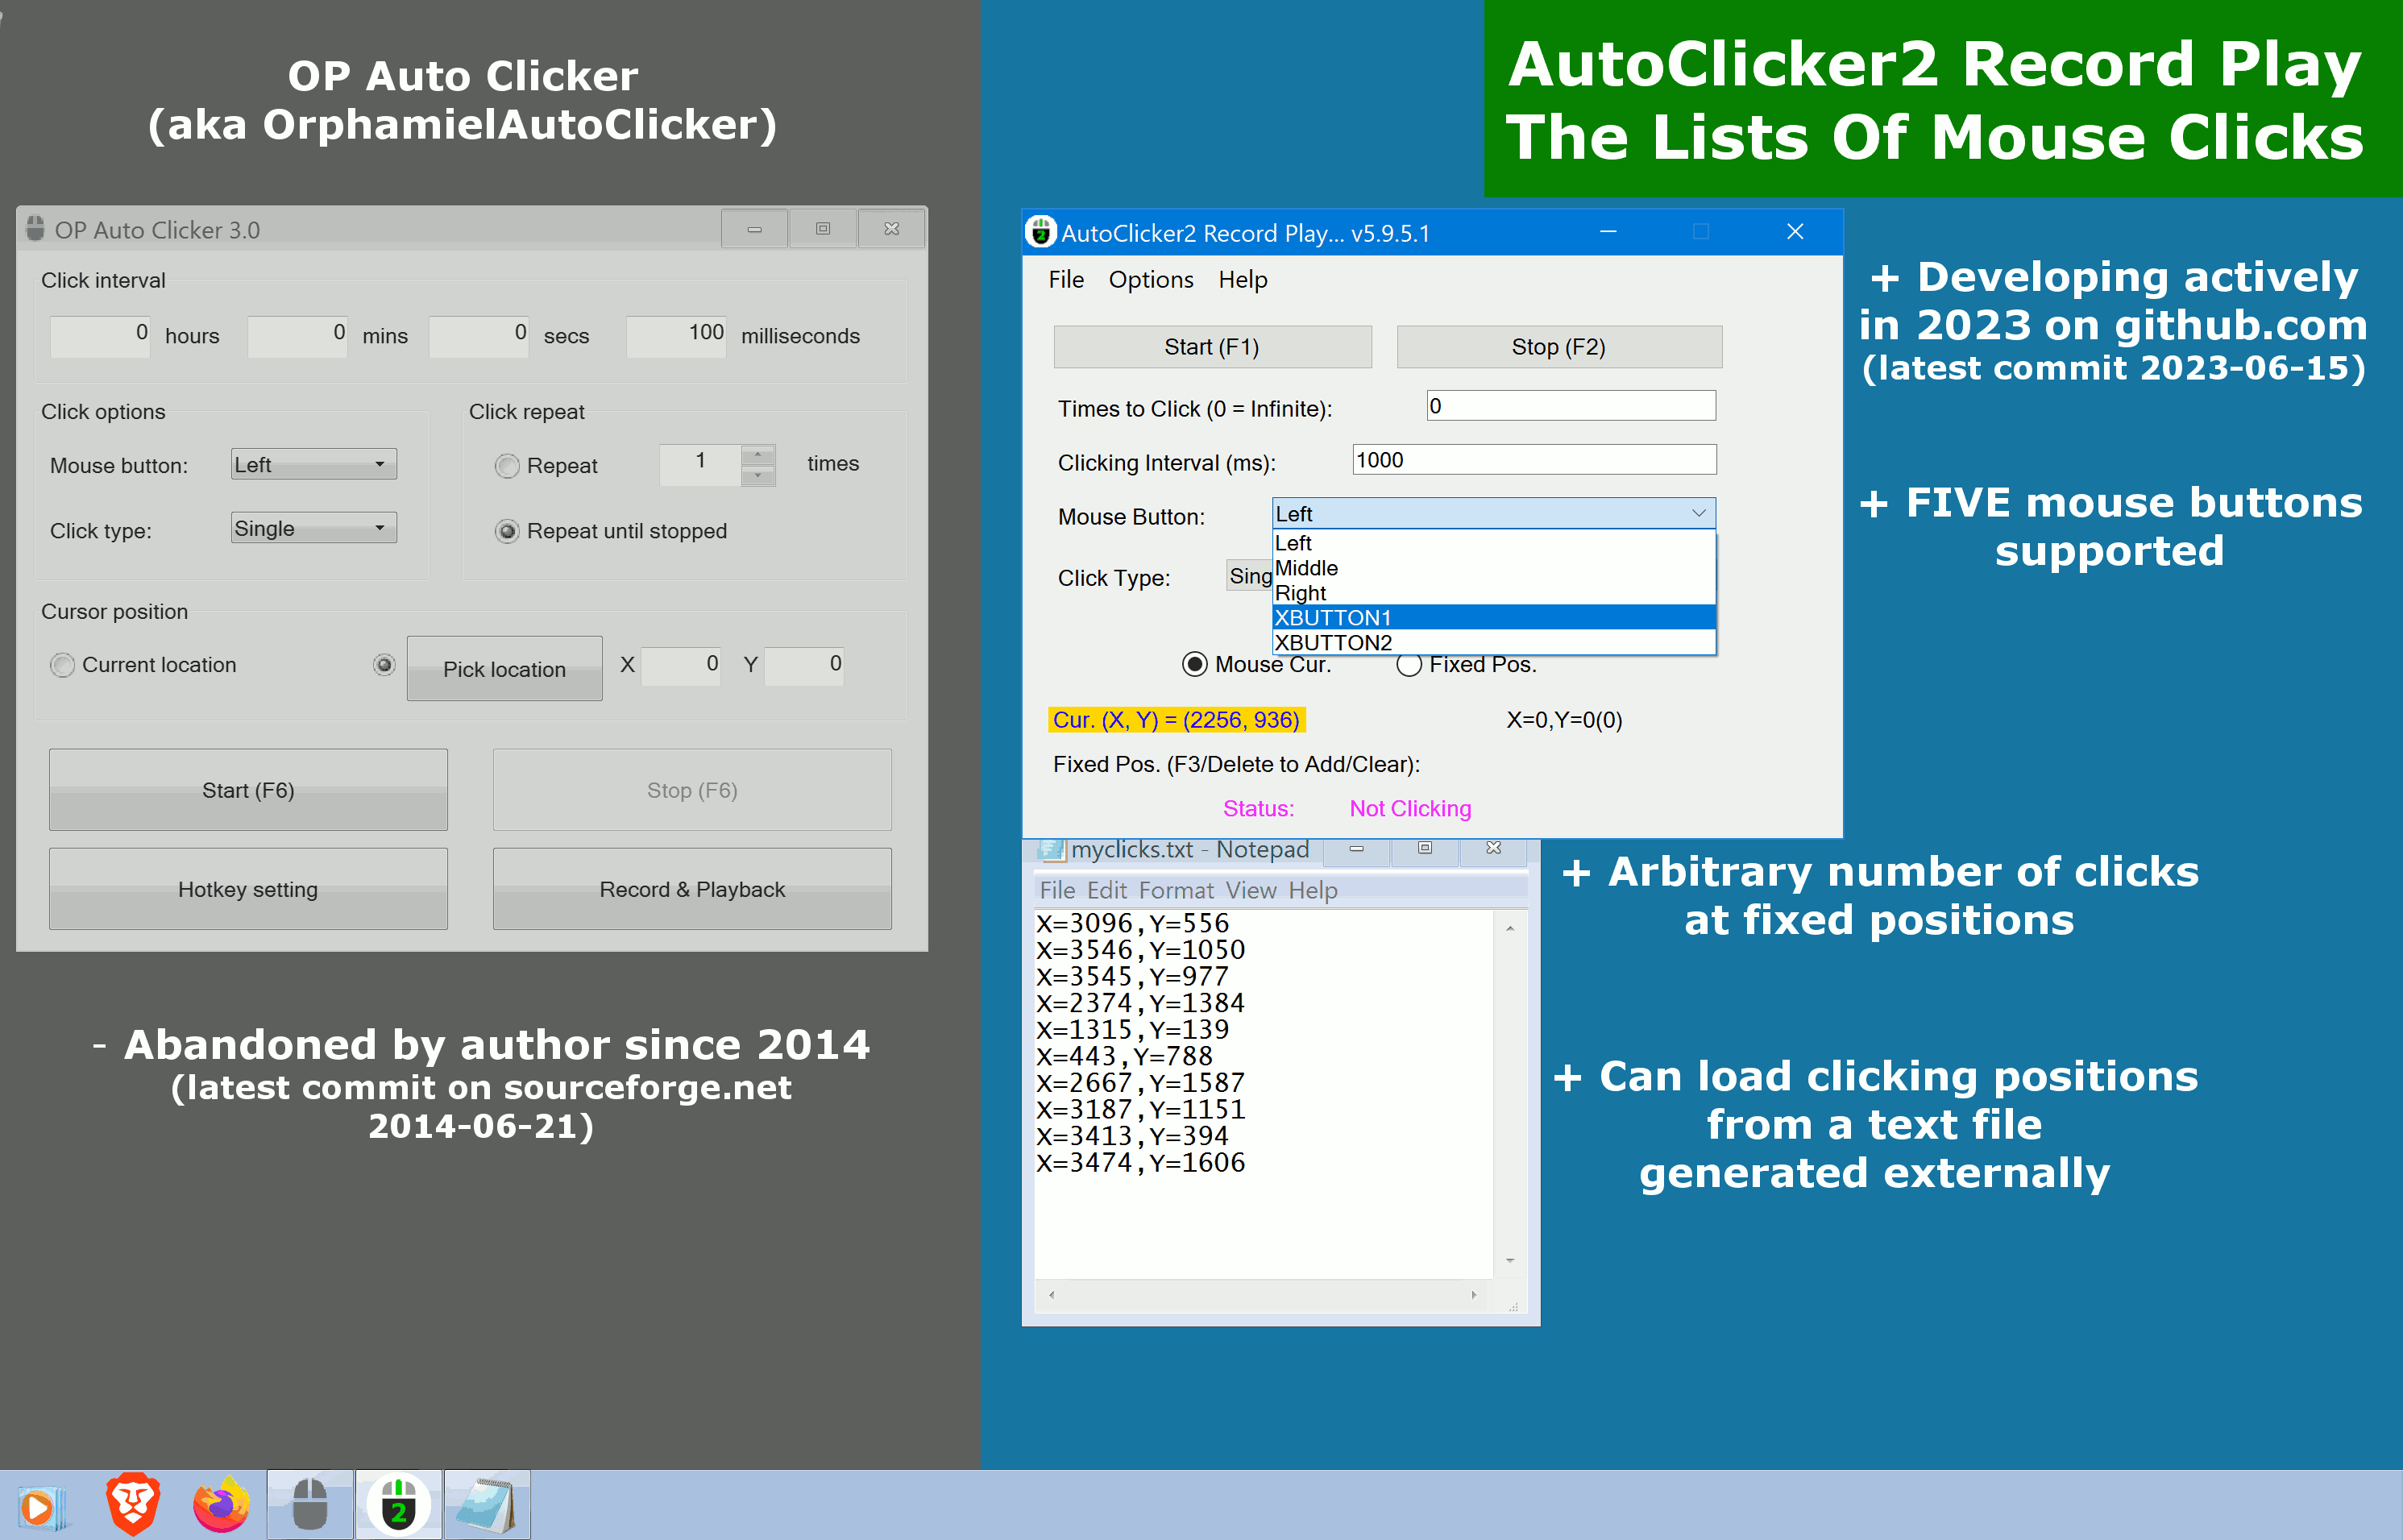 AutoClicker2 Record Play The Lists Of Mouse Clicks version 5.9.6.0: "AutoClicker2" application